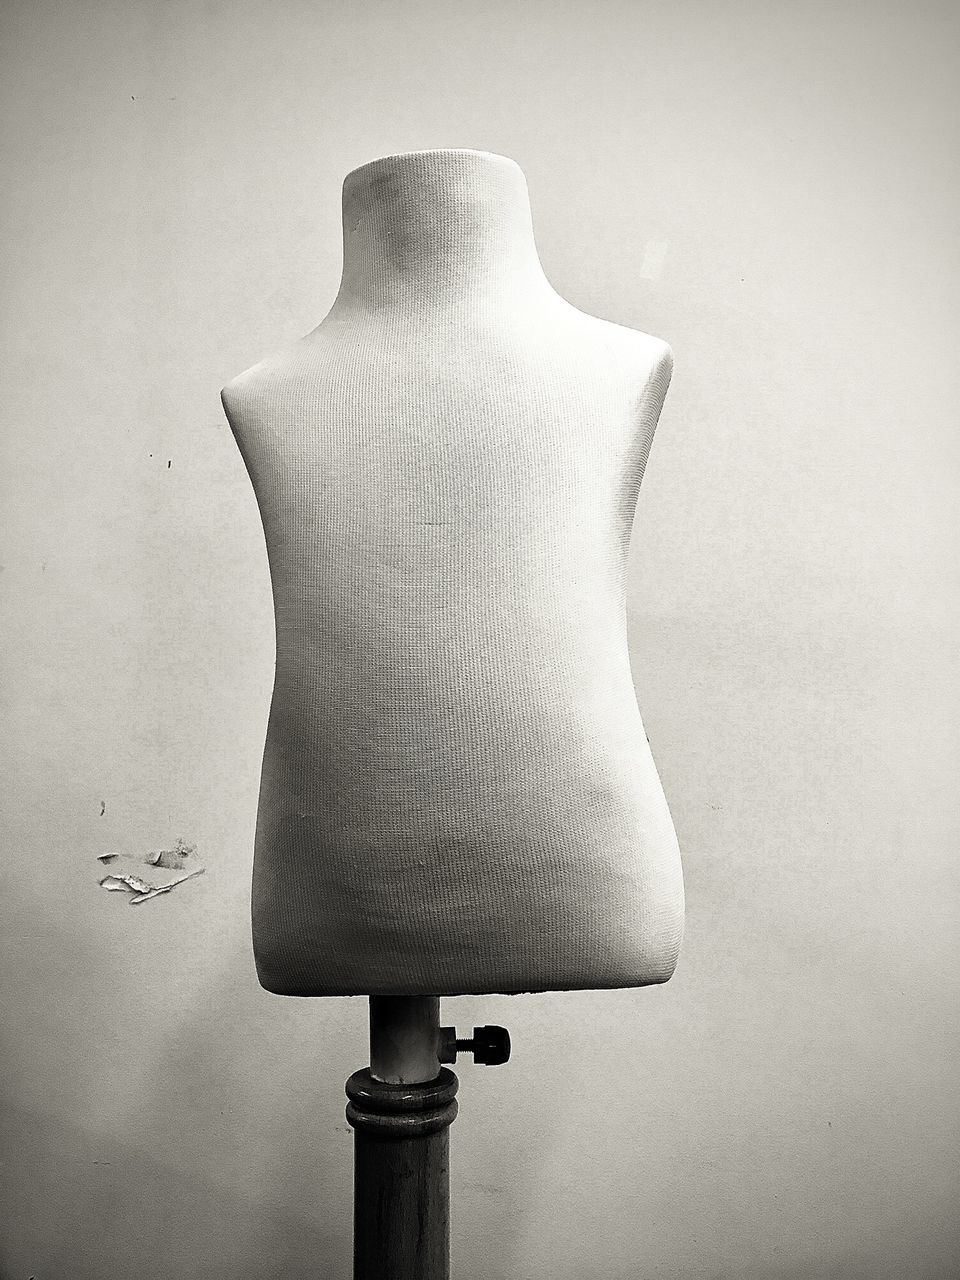 mannequin, human representation, representation, fashion, no people, art and craft, indoors, wall - building feature, still life, female likeness, day, craft, creativity, industry, lighting equipment, single object, close-up, studio shot, electric lamp, dressmaker's model